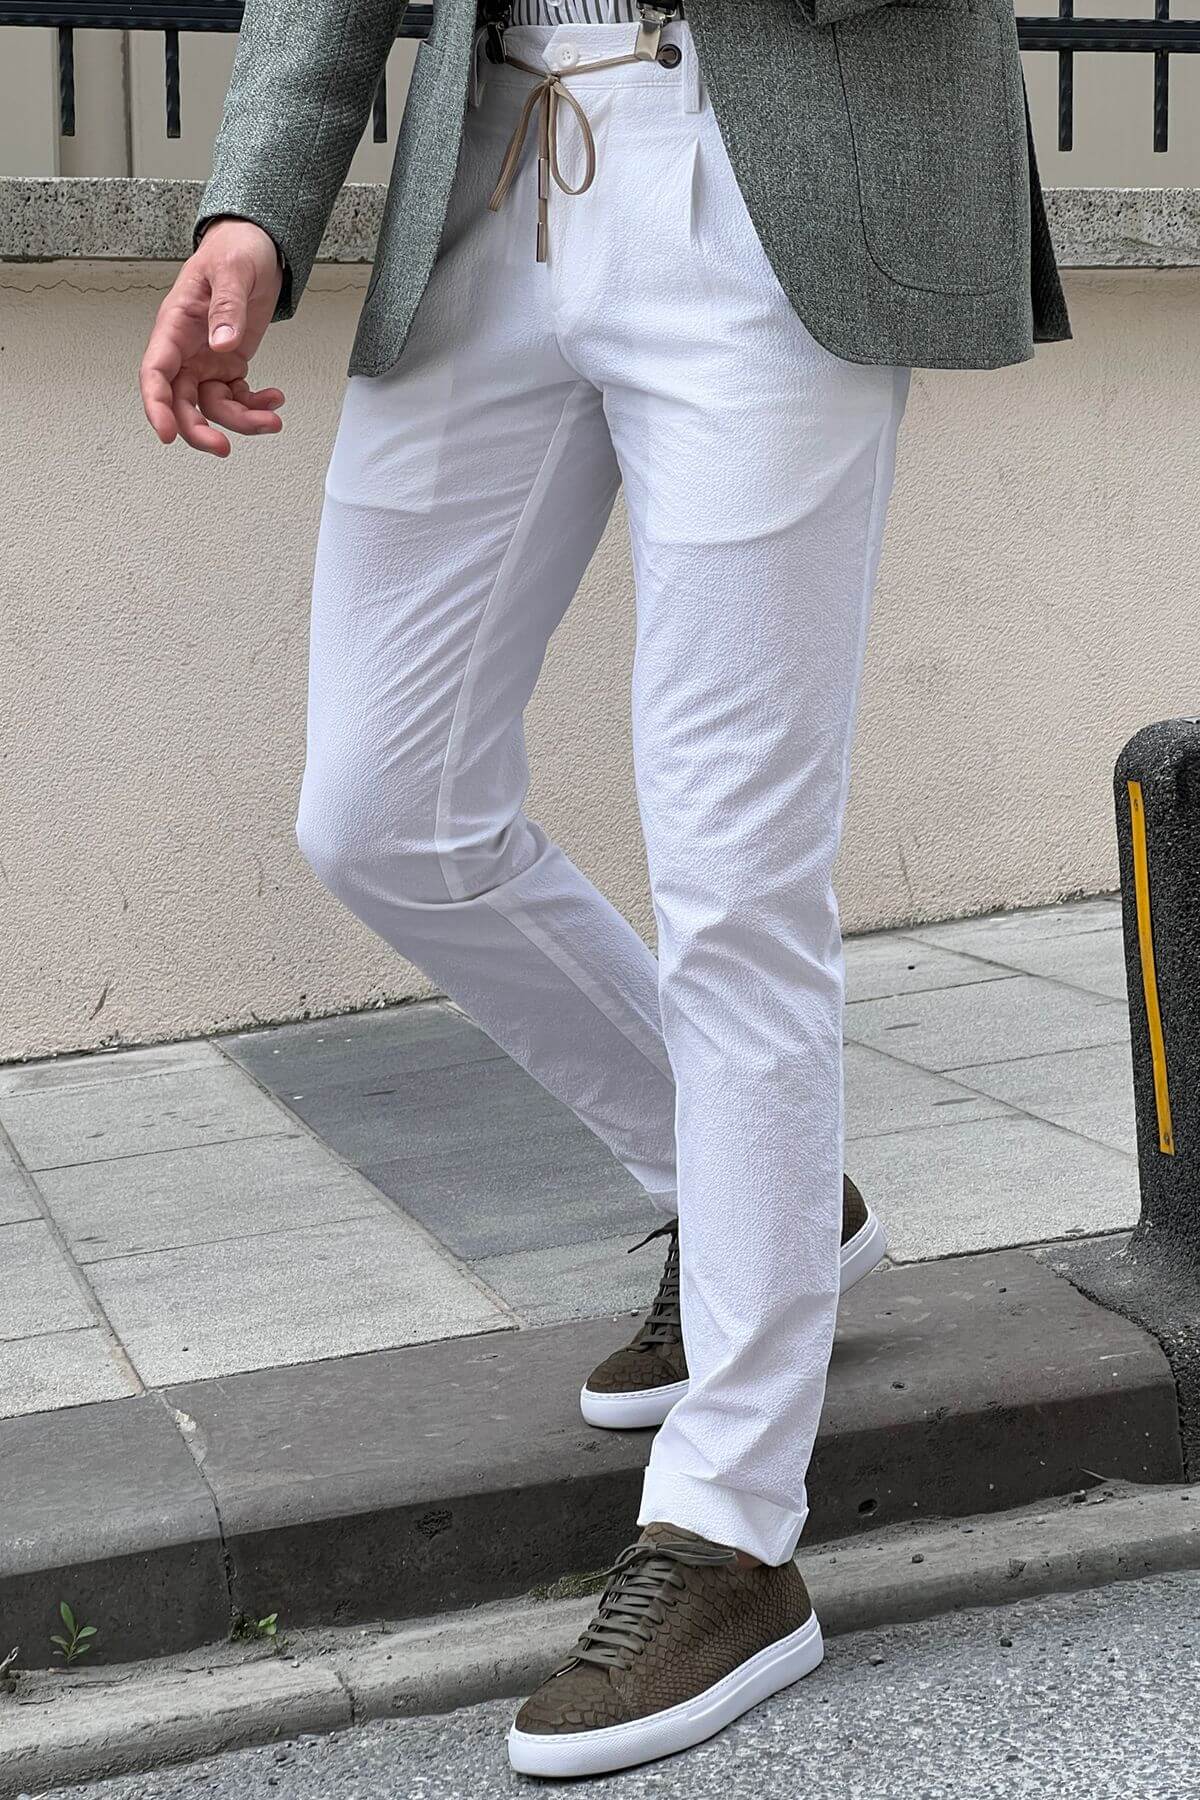 A Slim Fit White Cotton Trouser on display